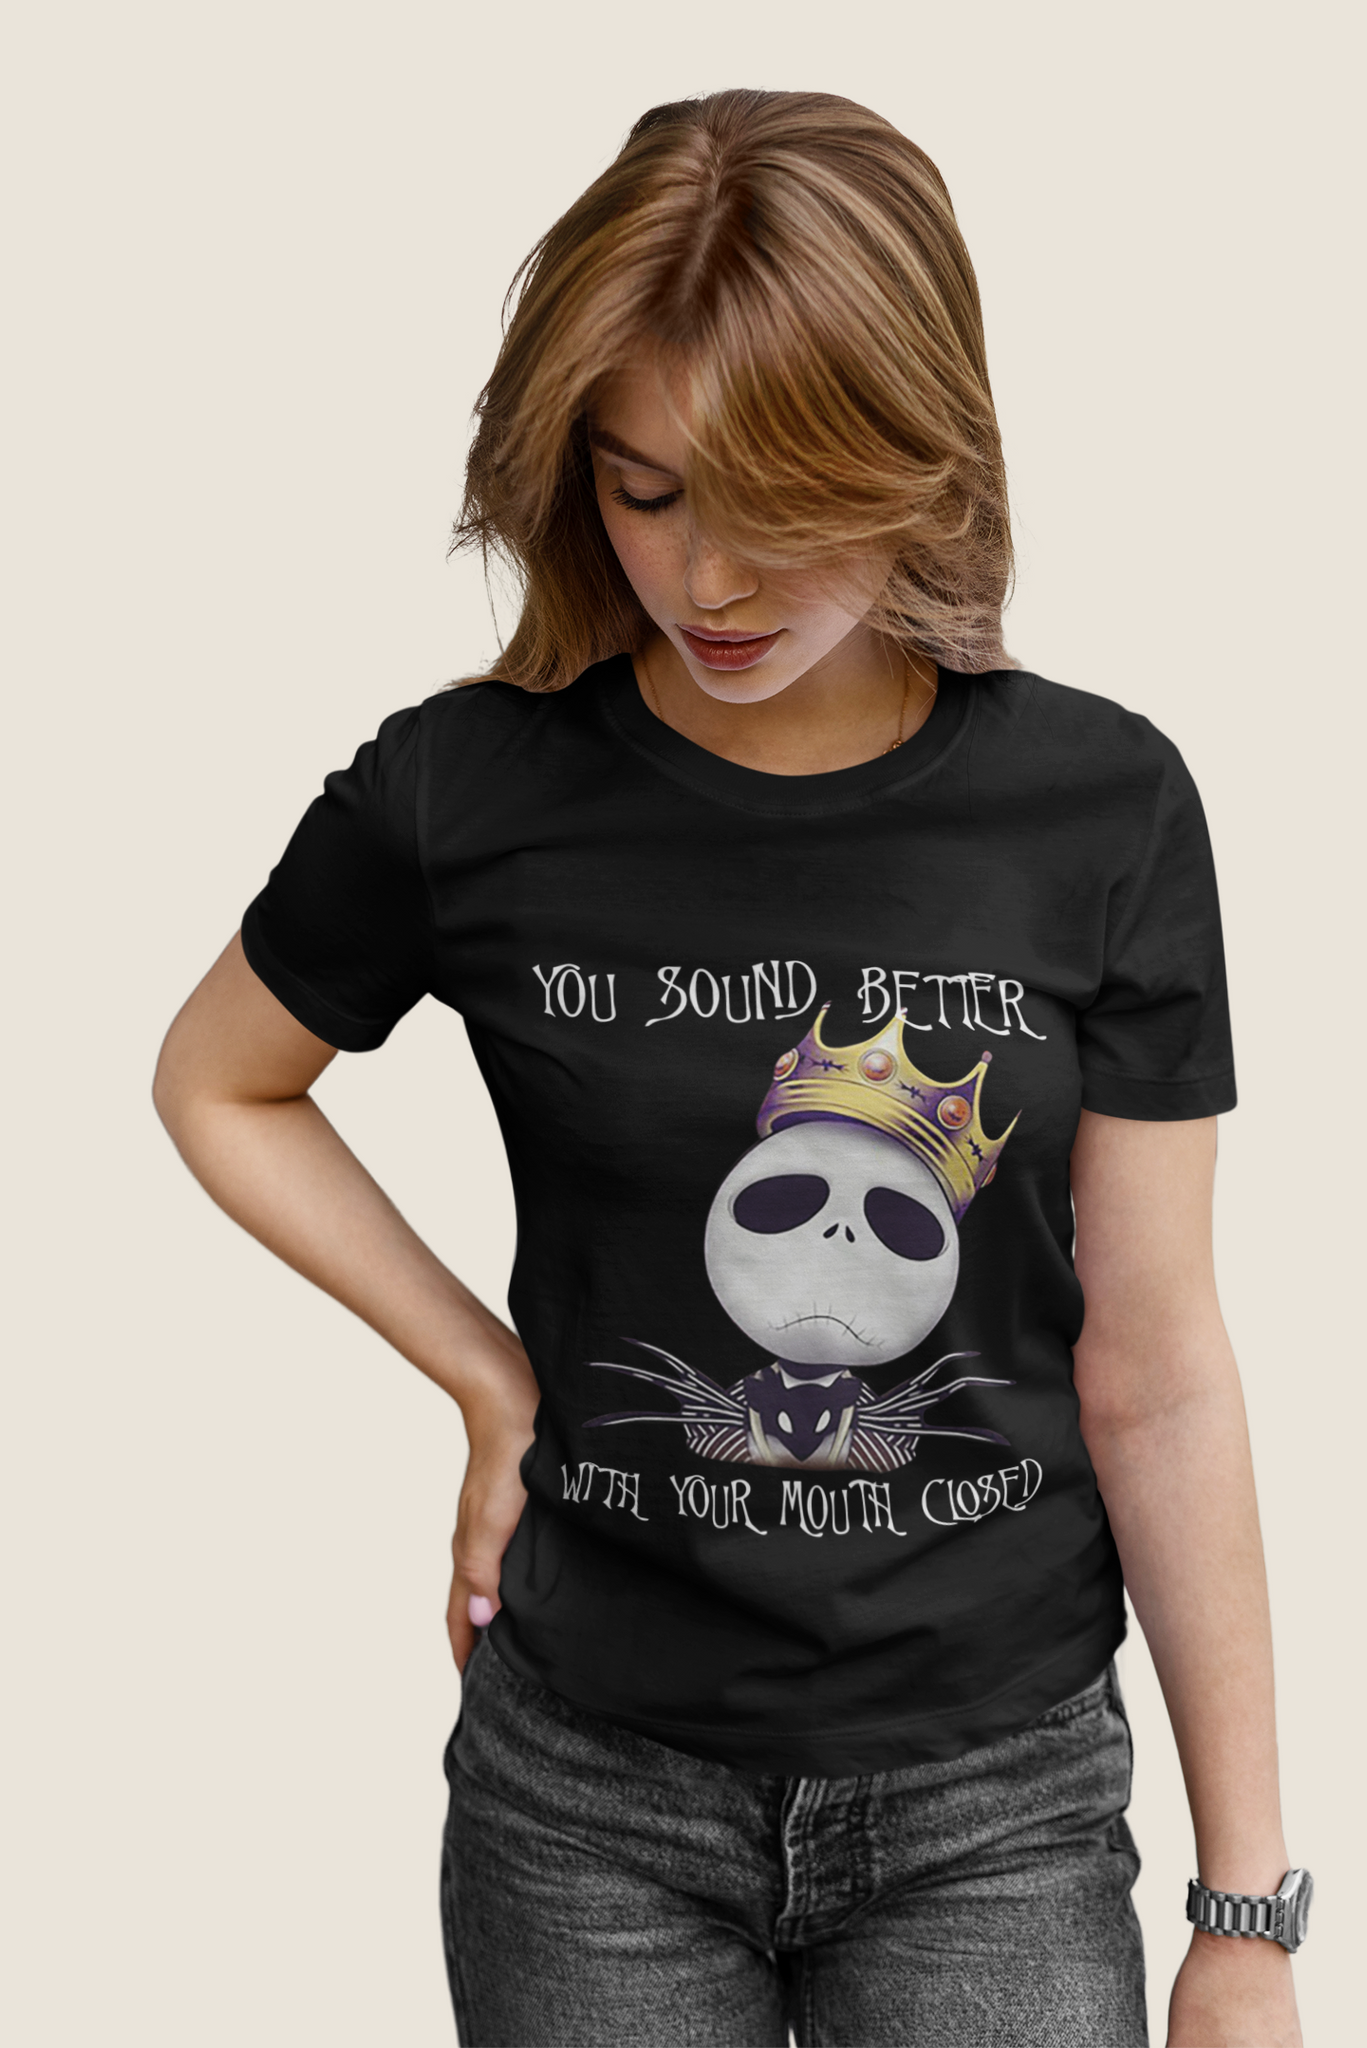 Nightmare Before Christmas T Shirt, Jack Skellington T Shirt, You Sound Better With Your Mouth Closed Tshirt, Halloween Gifts